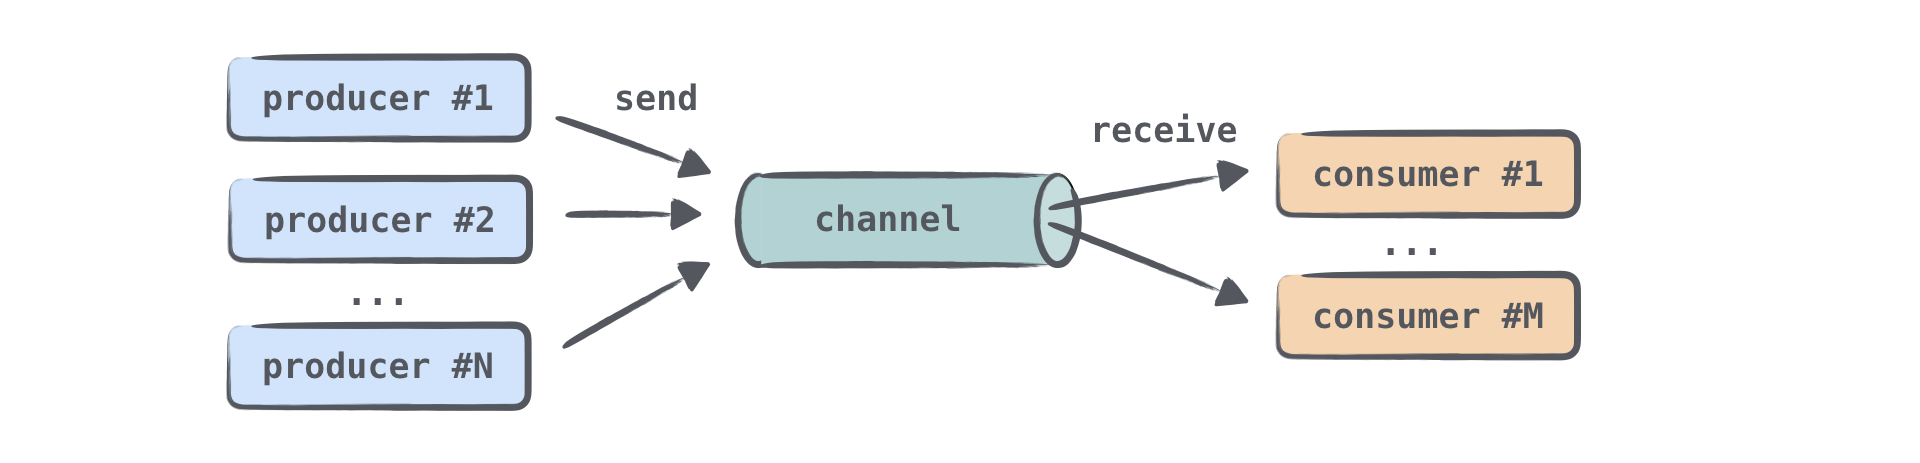 Using channels with many coroutines